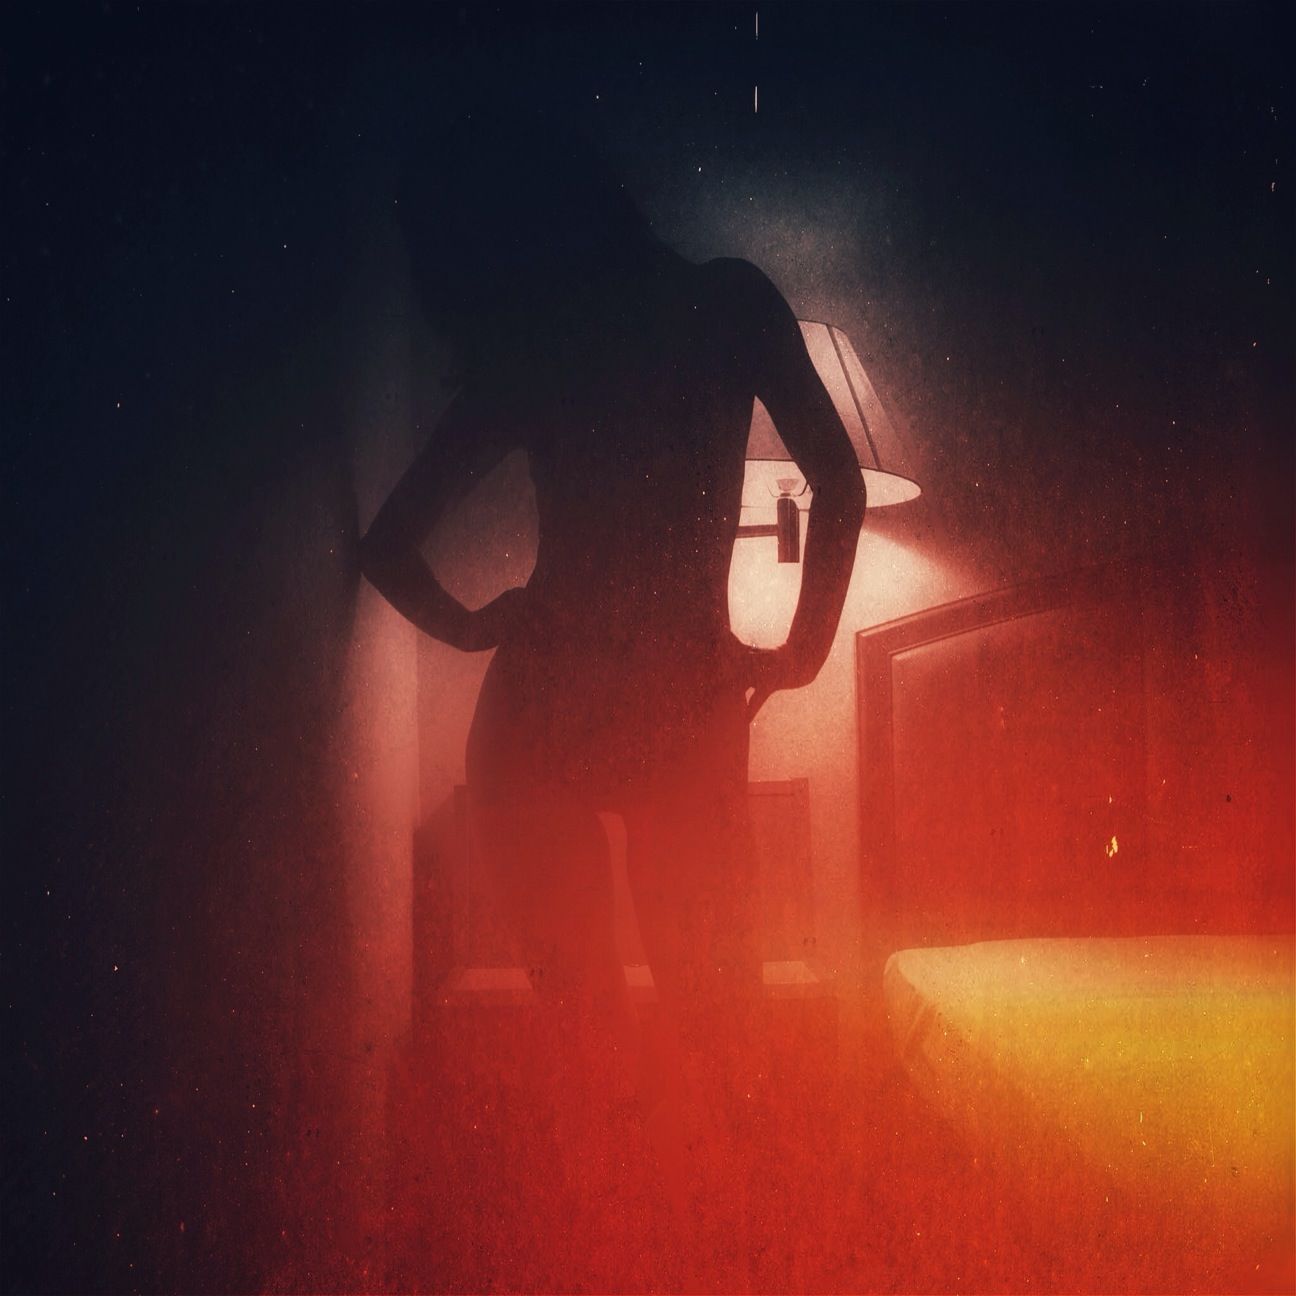 indoors, night, illuminated, dark, silhouette, red, wall - building feature, lifestyles, window, light - natural phenomenon, men, leisure activity, copy space, darkroom, full length, auto post production filter, unrecognizable person, glowing